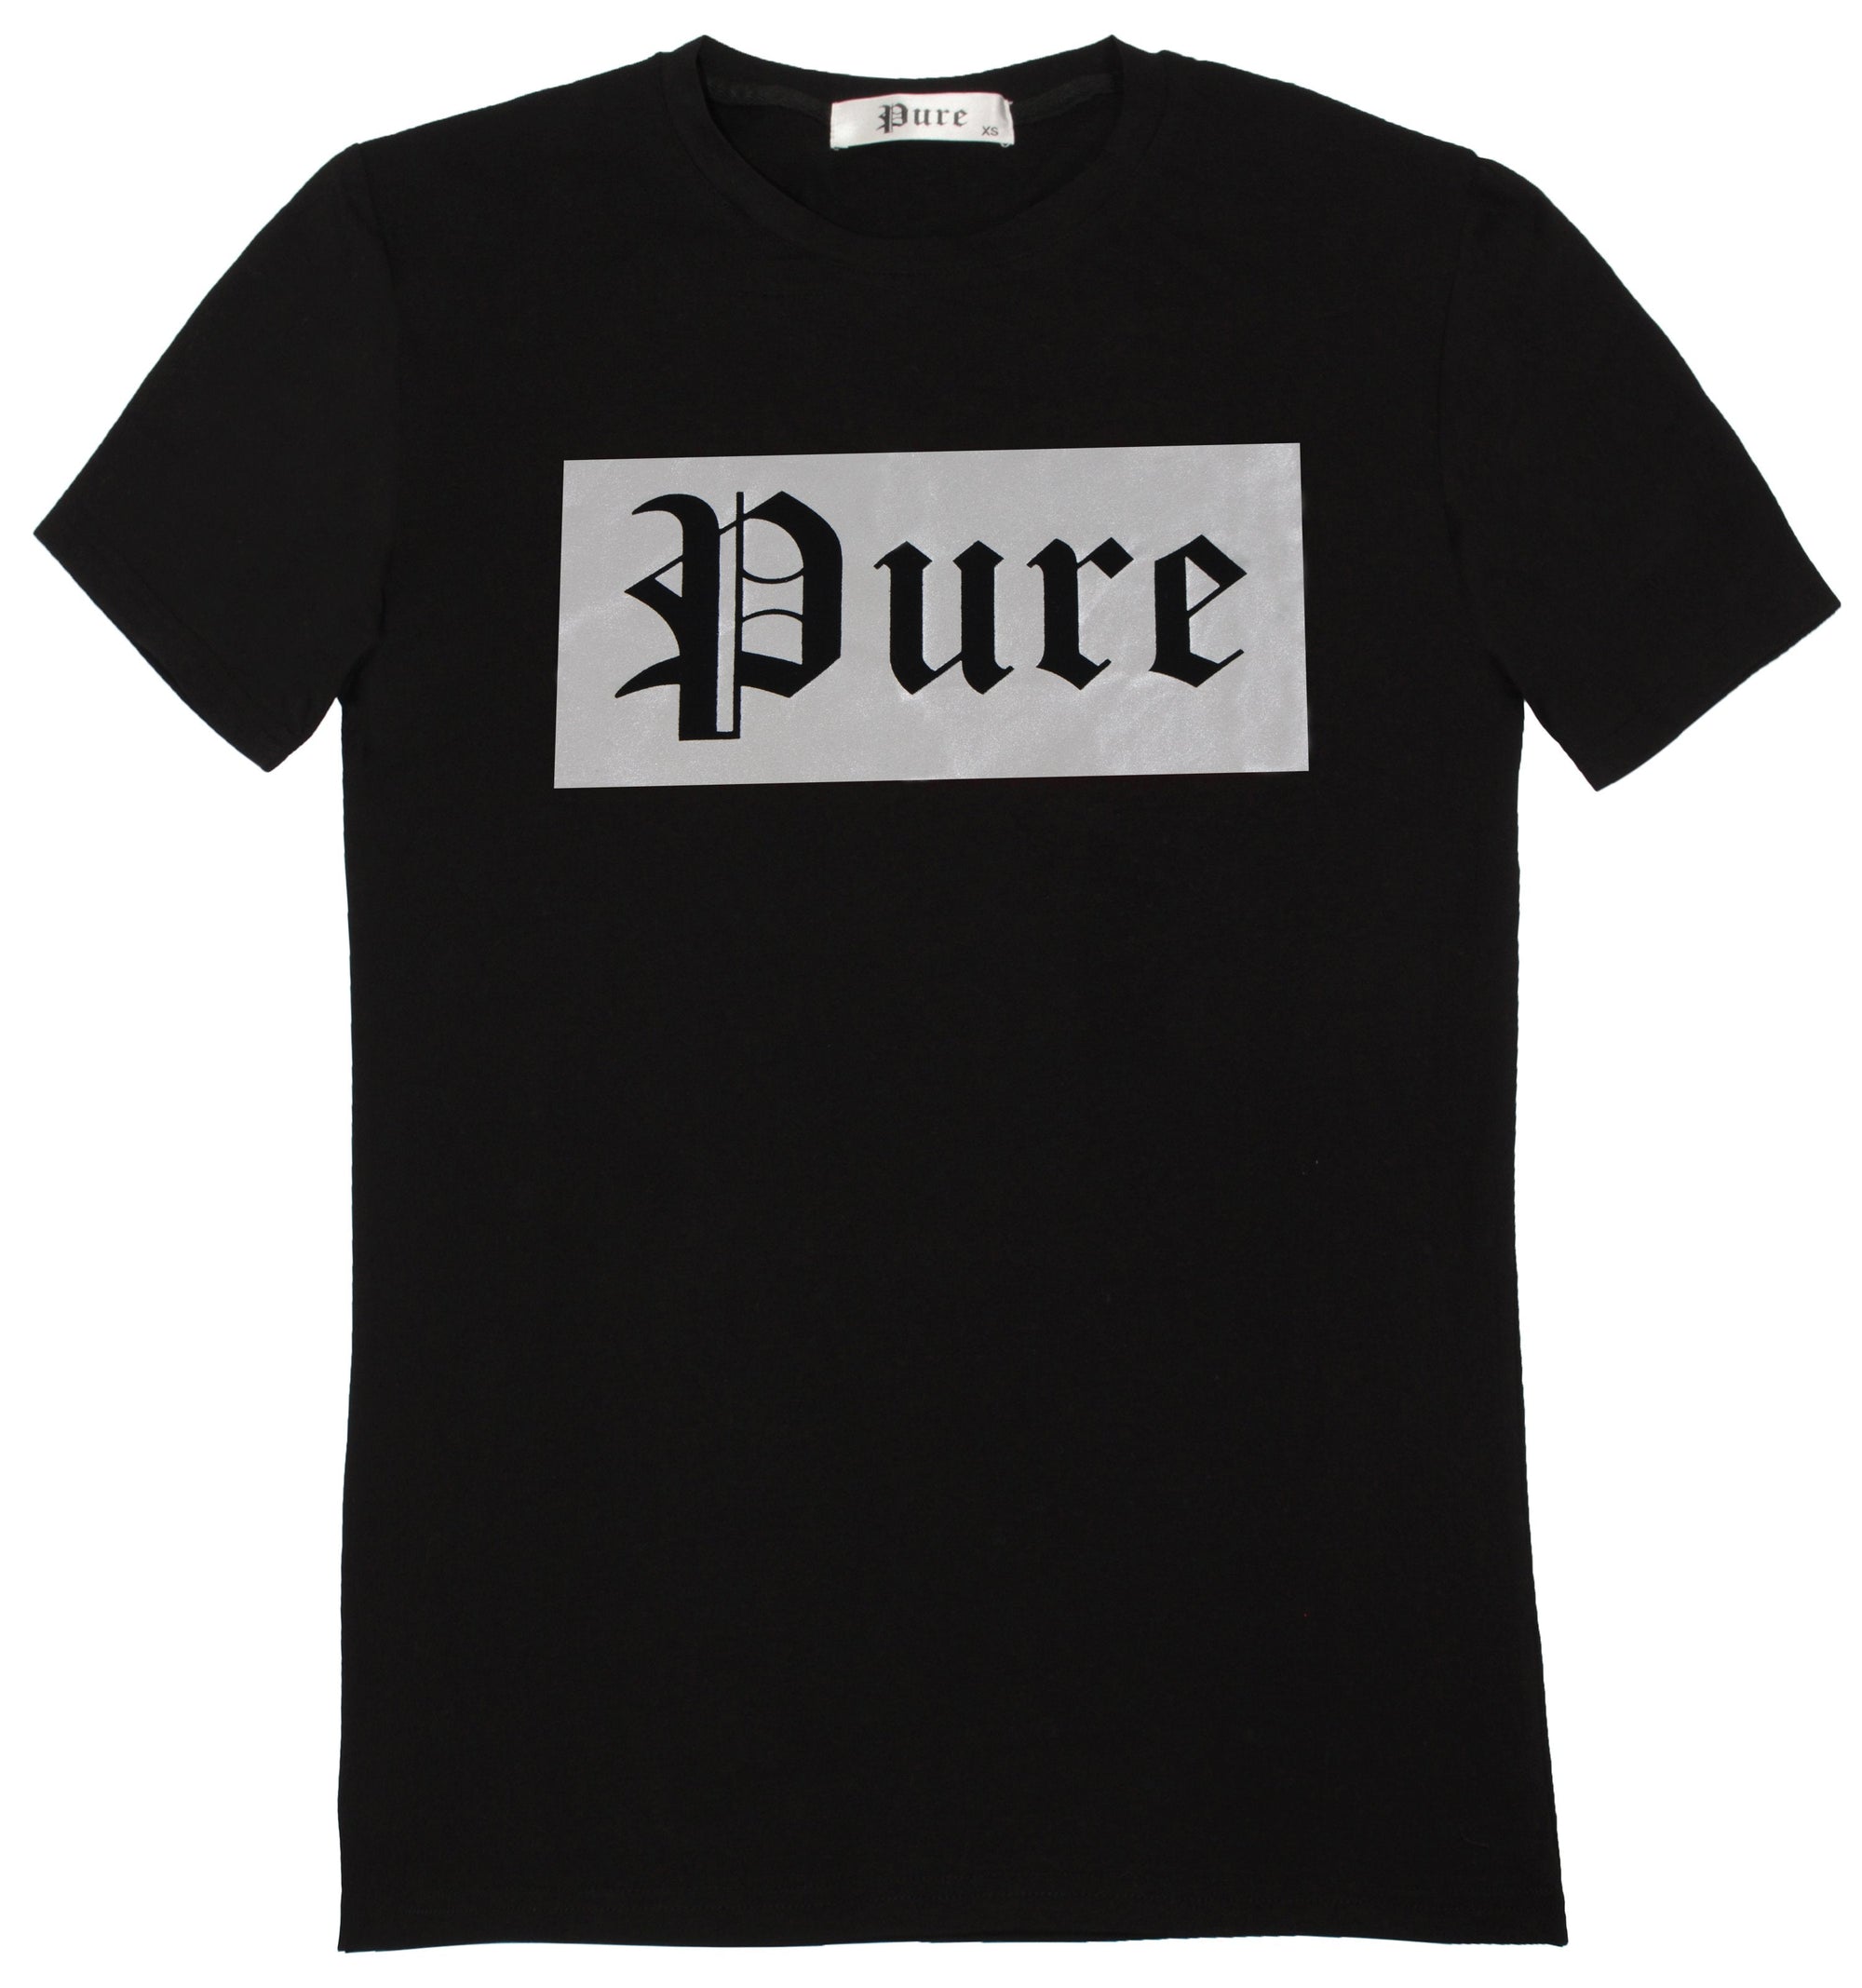 New 2021 Black Logo Tee with Silver Pure Logo